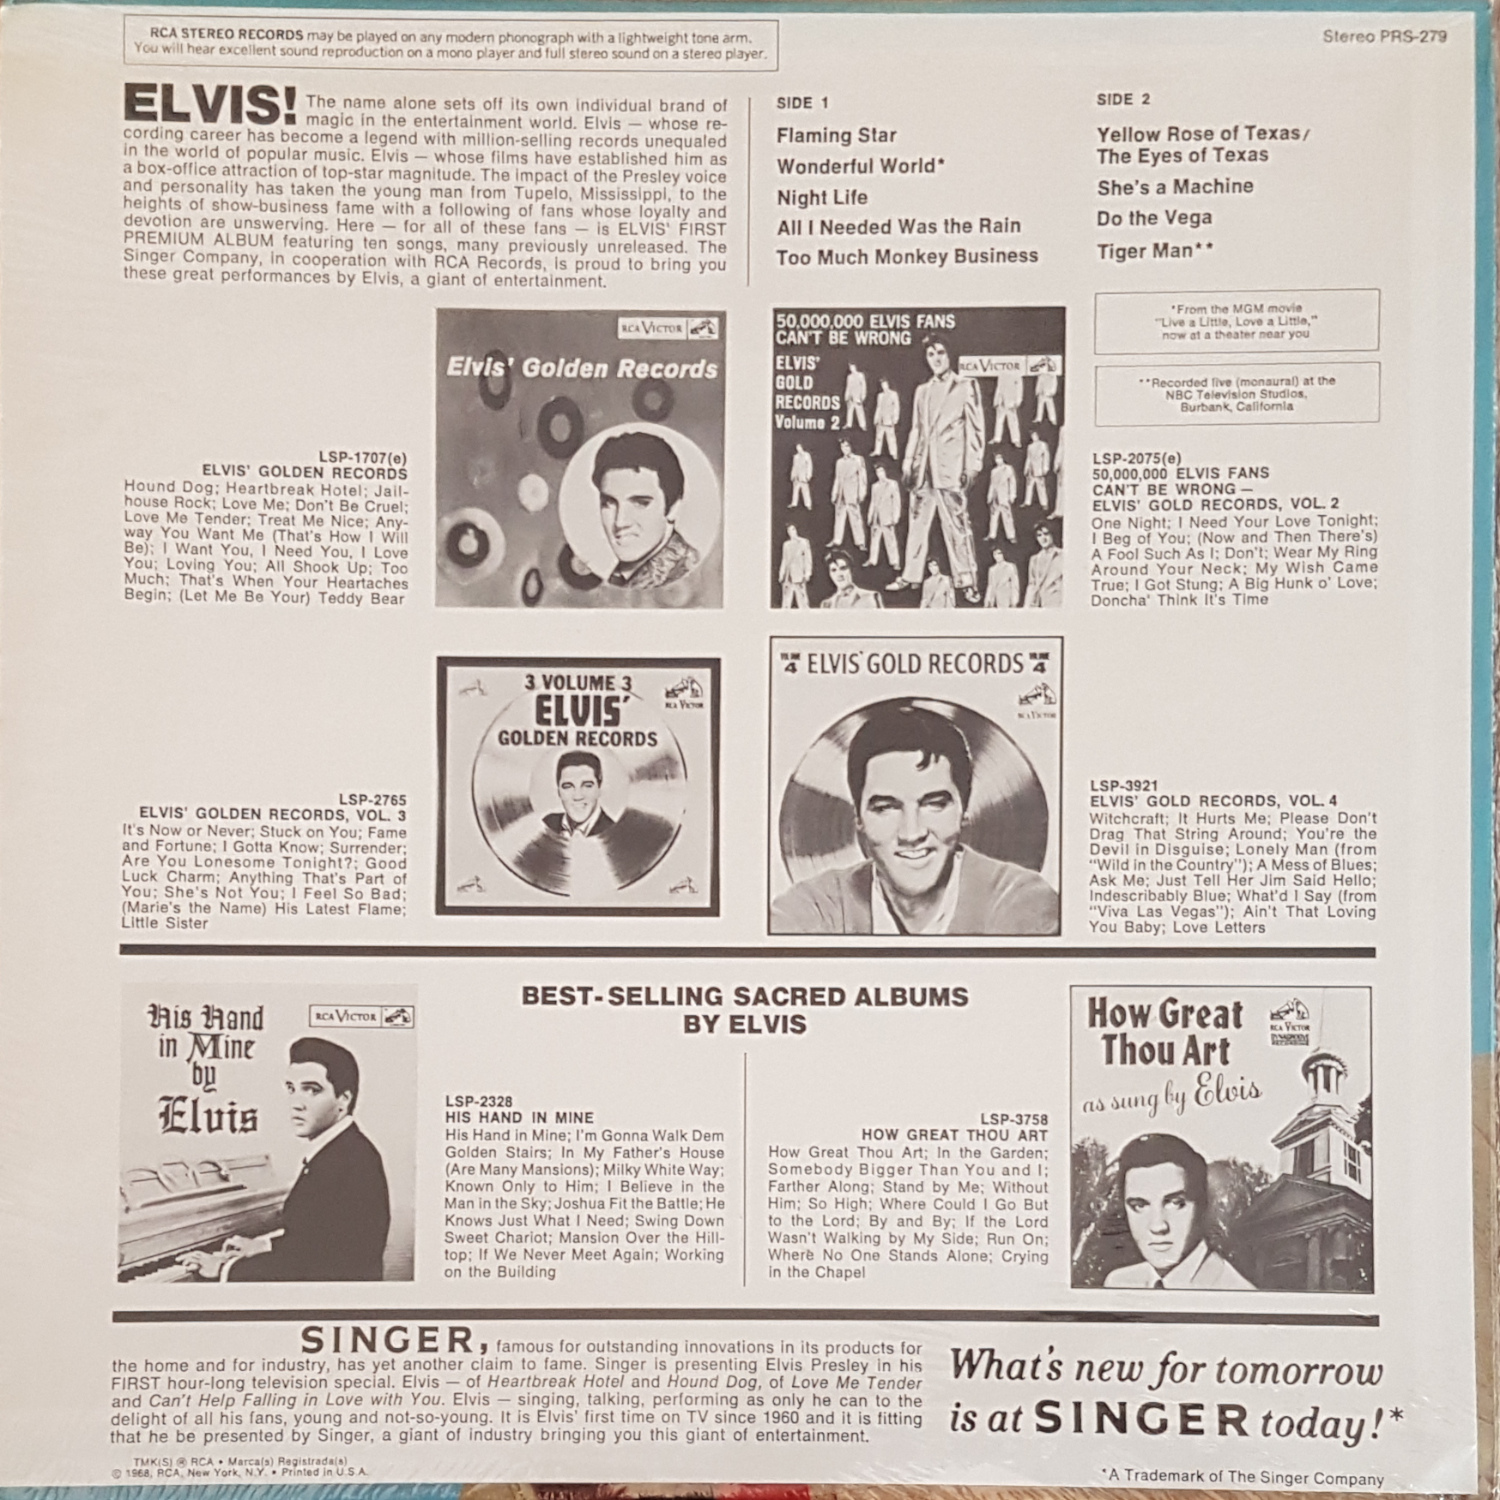 SINGER PRESENTS ELVIS SINGS FLAMING STAR AND OTHERS Prs-27926zkx8